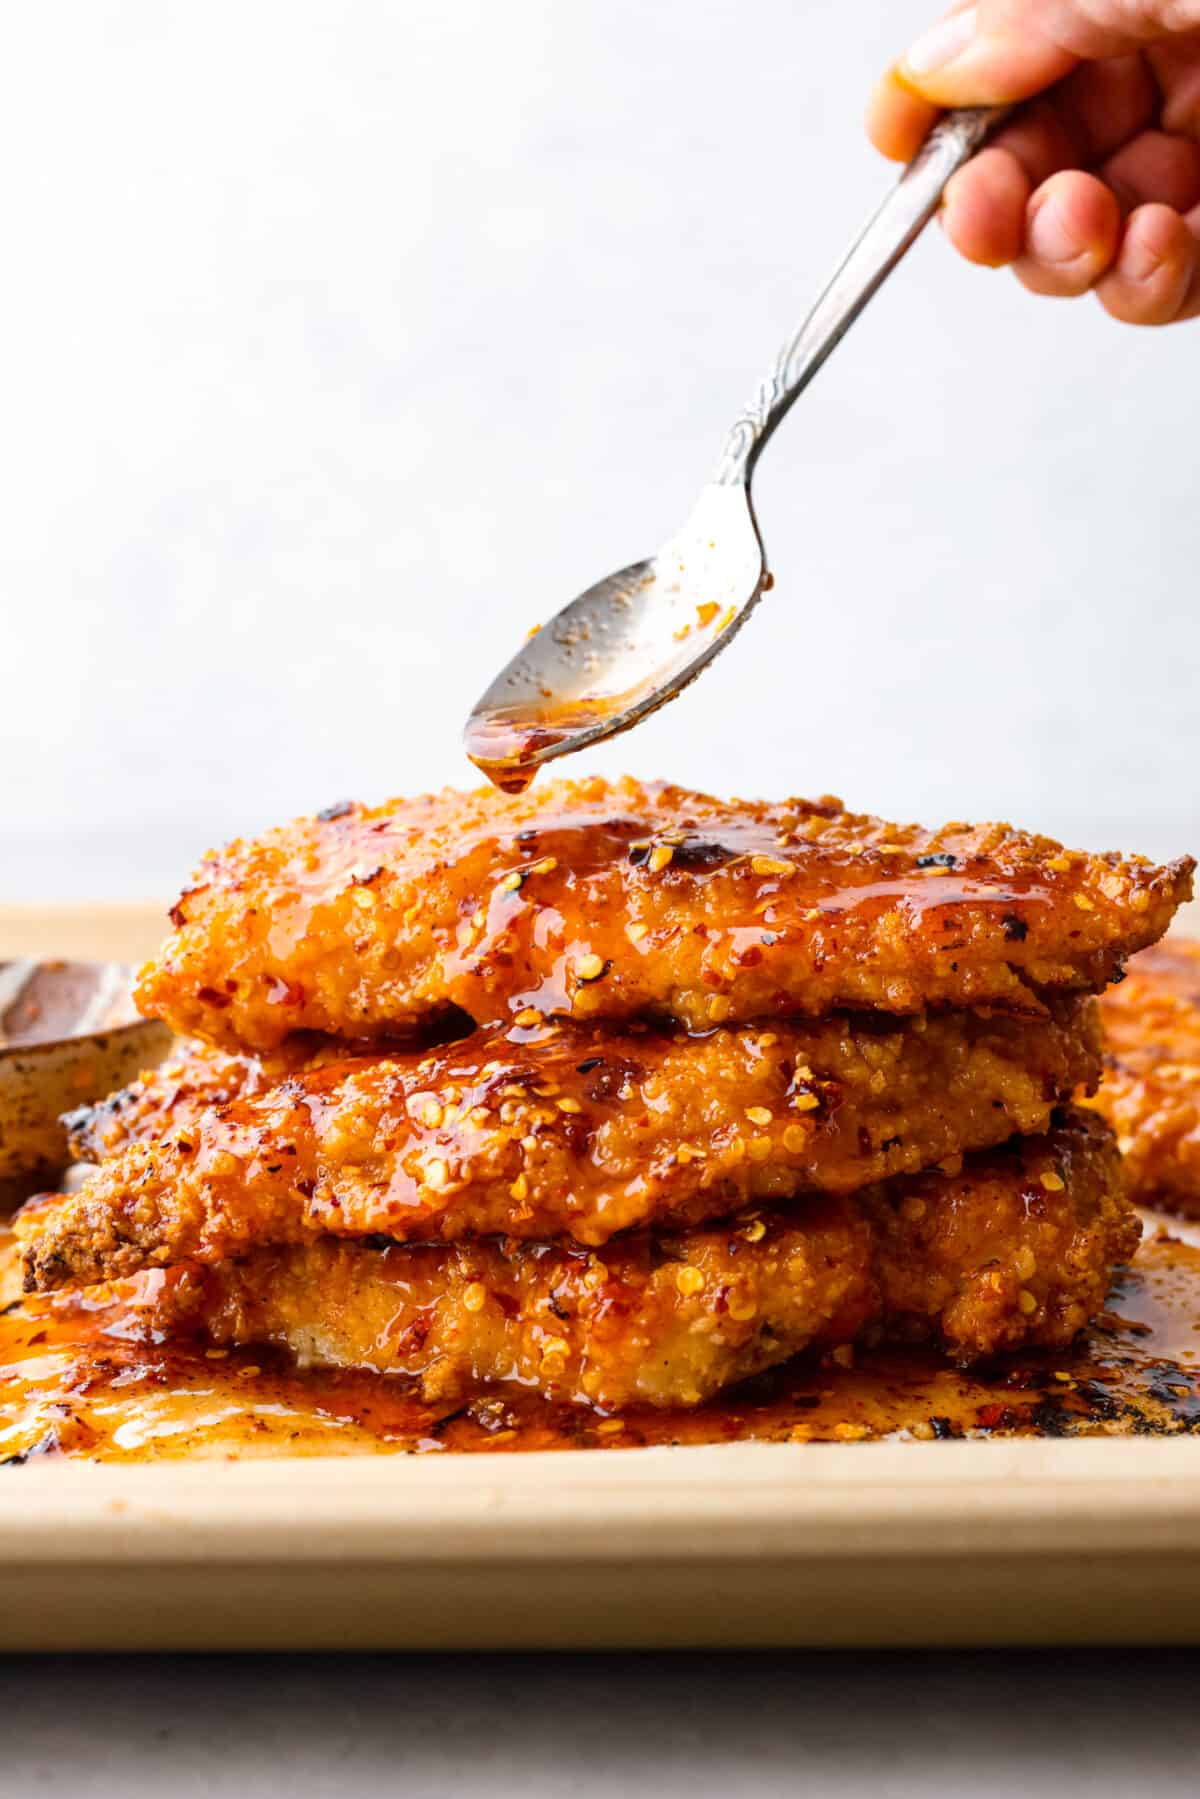 3 pieces of chicken stacked on top of each other, coated in a spicy glaze.